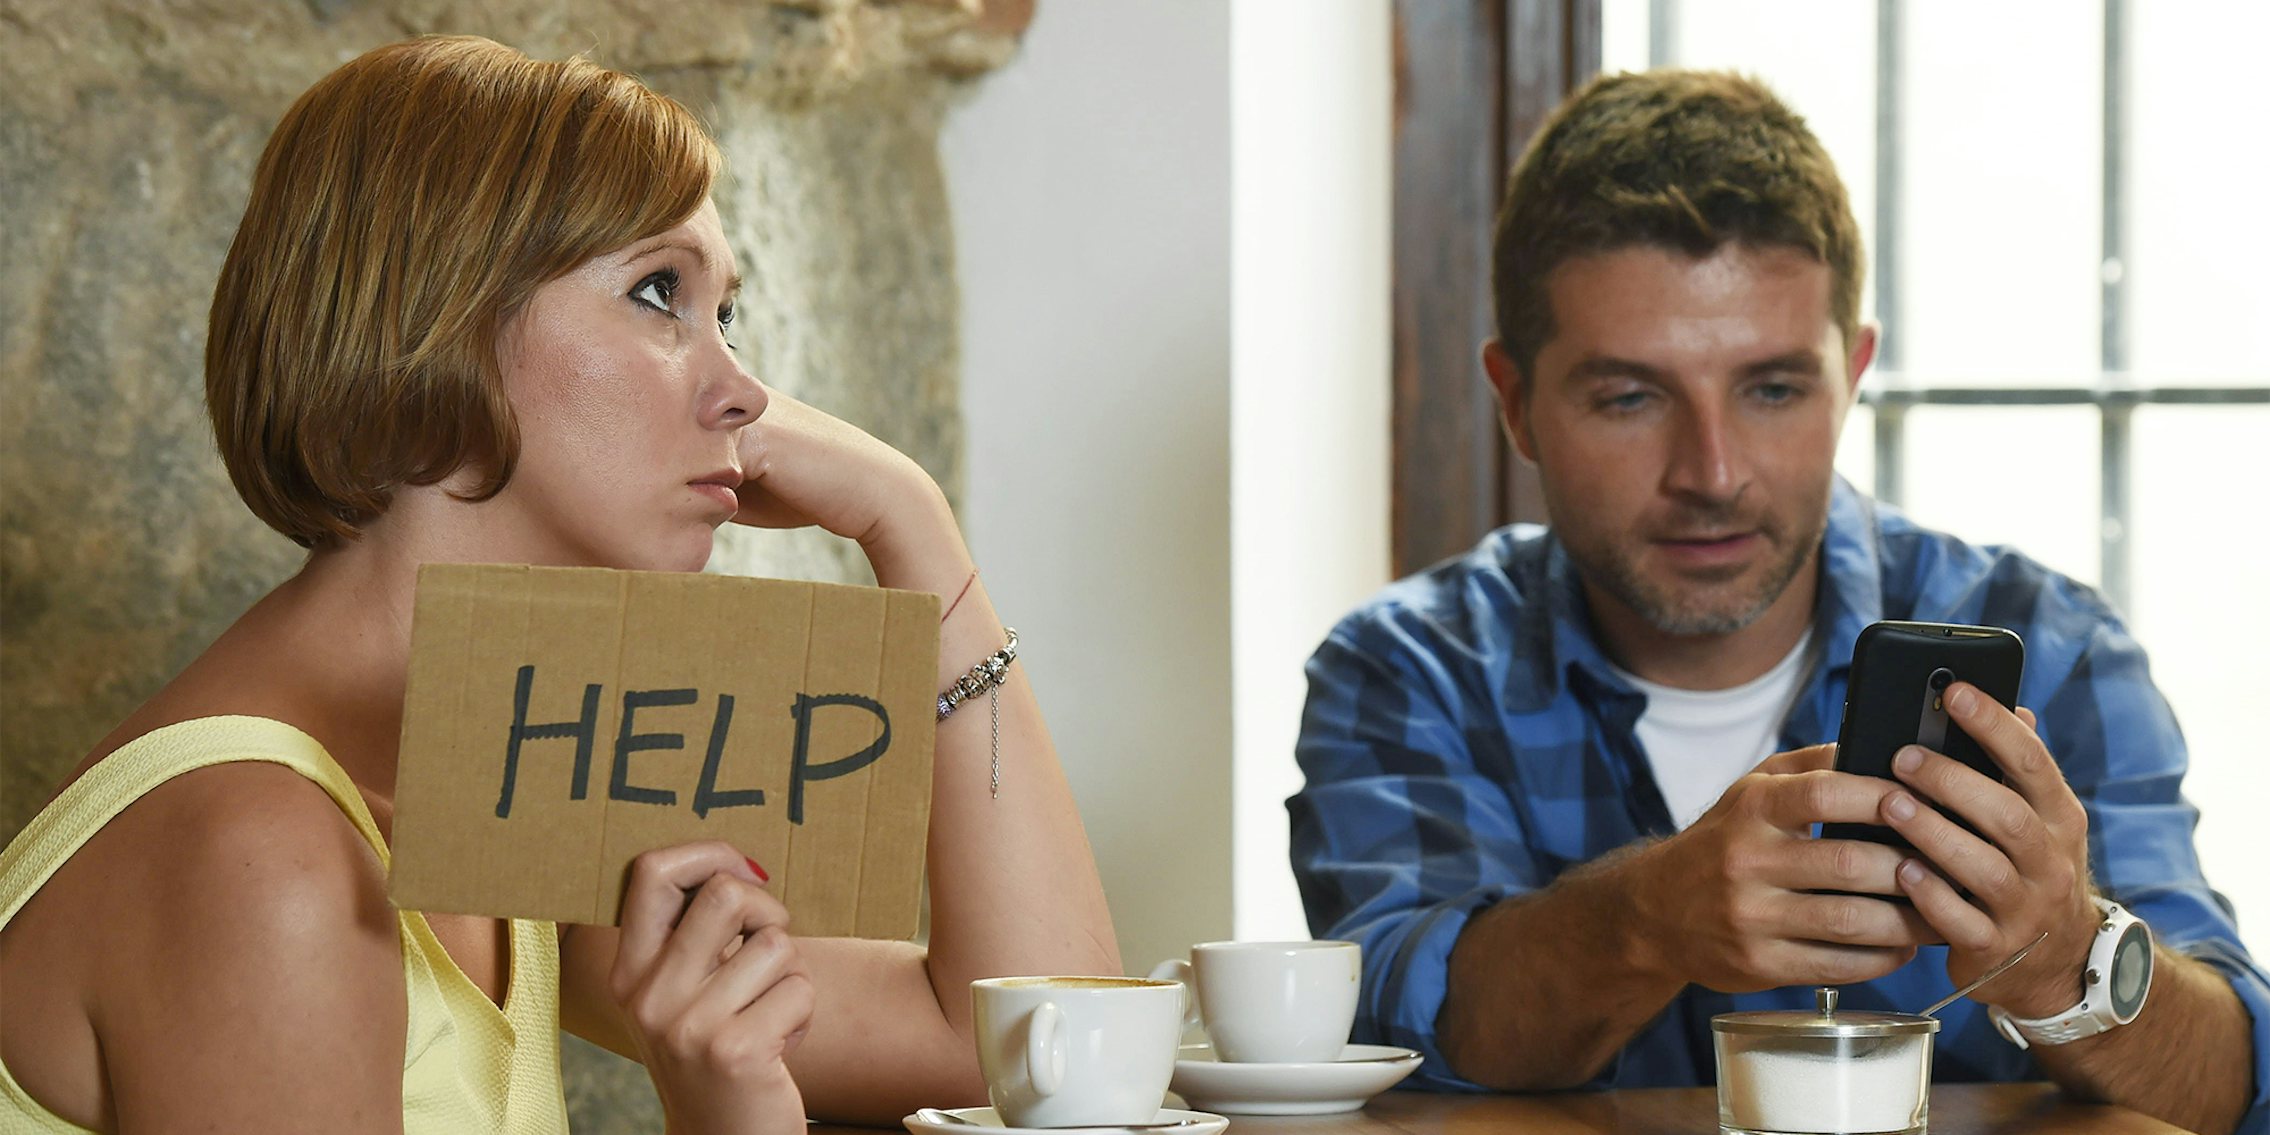 woman holding 'help' sign while man looks at phone